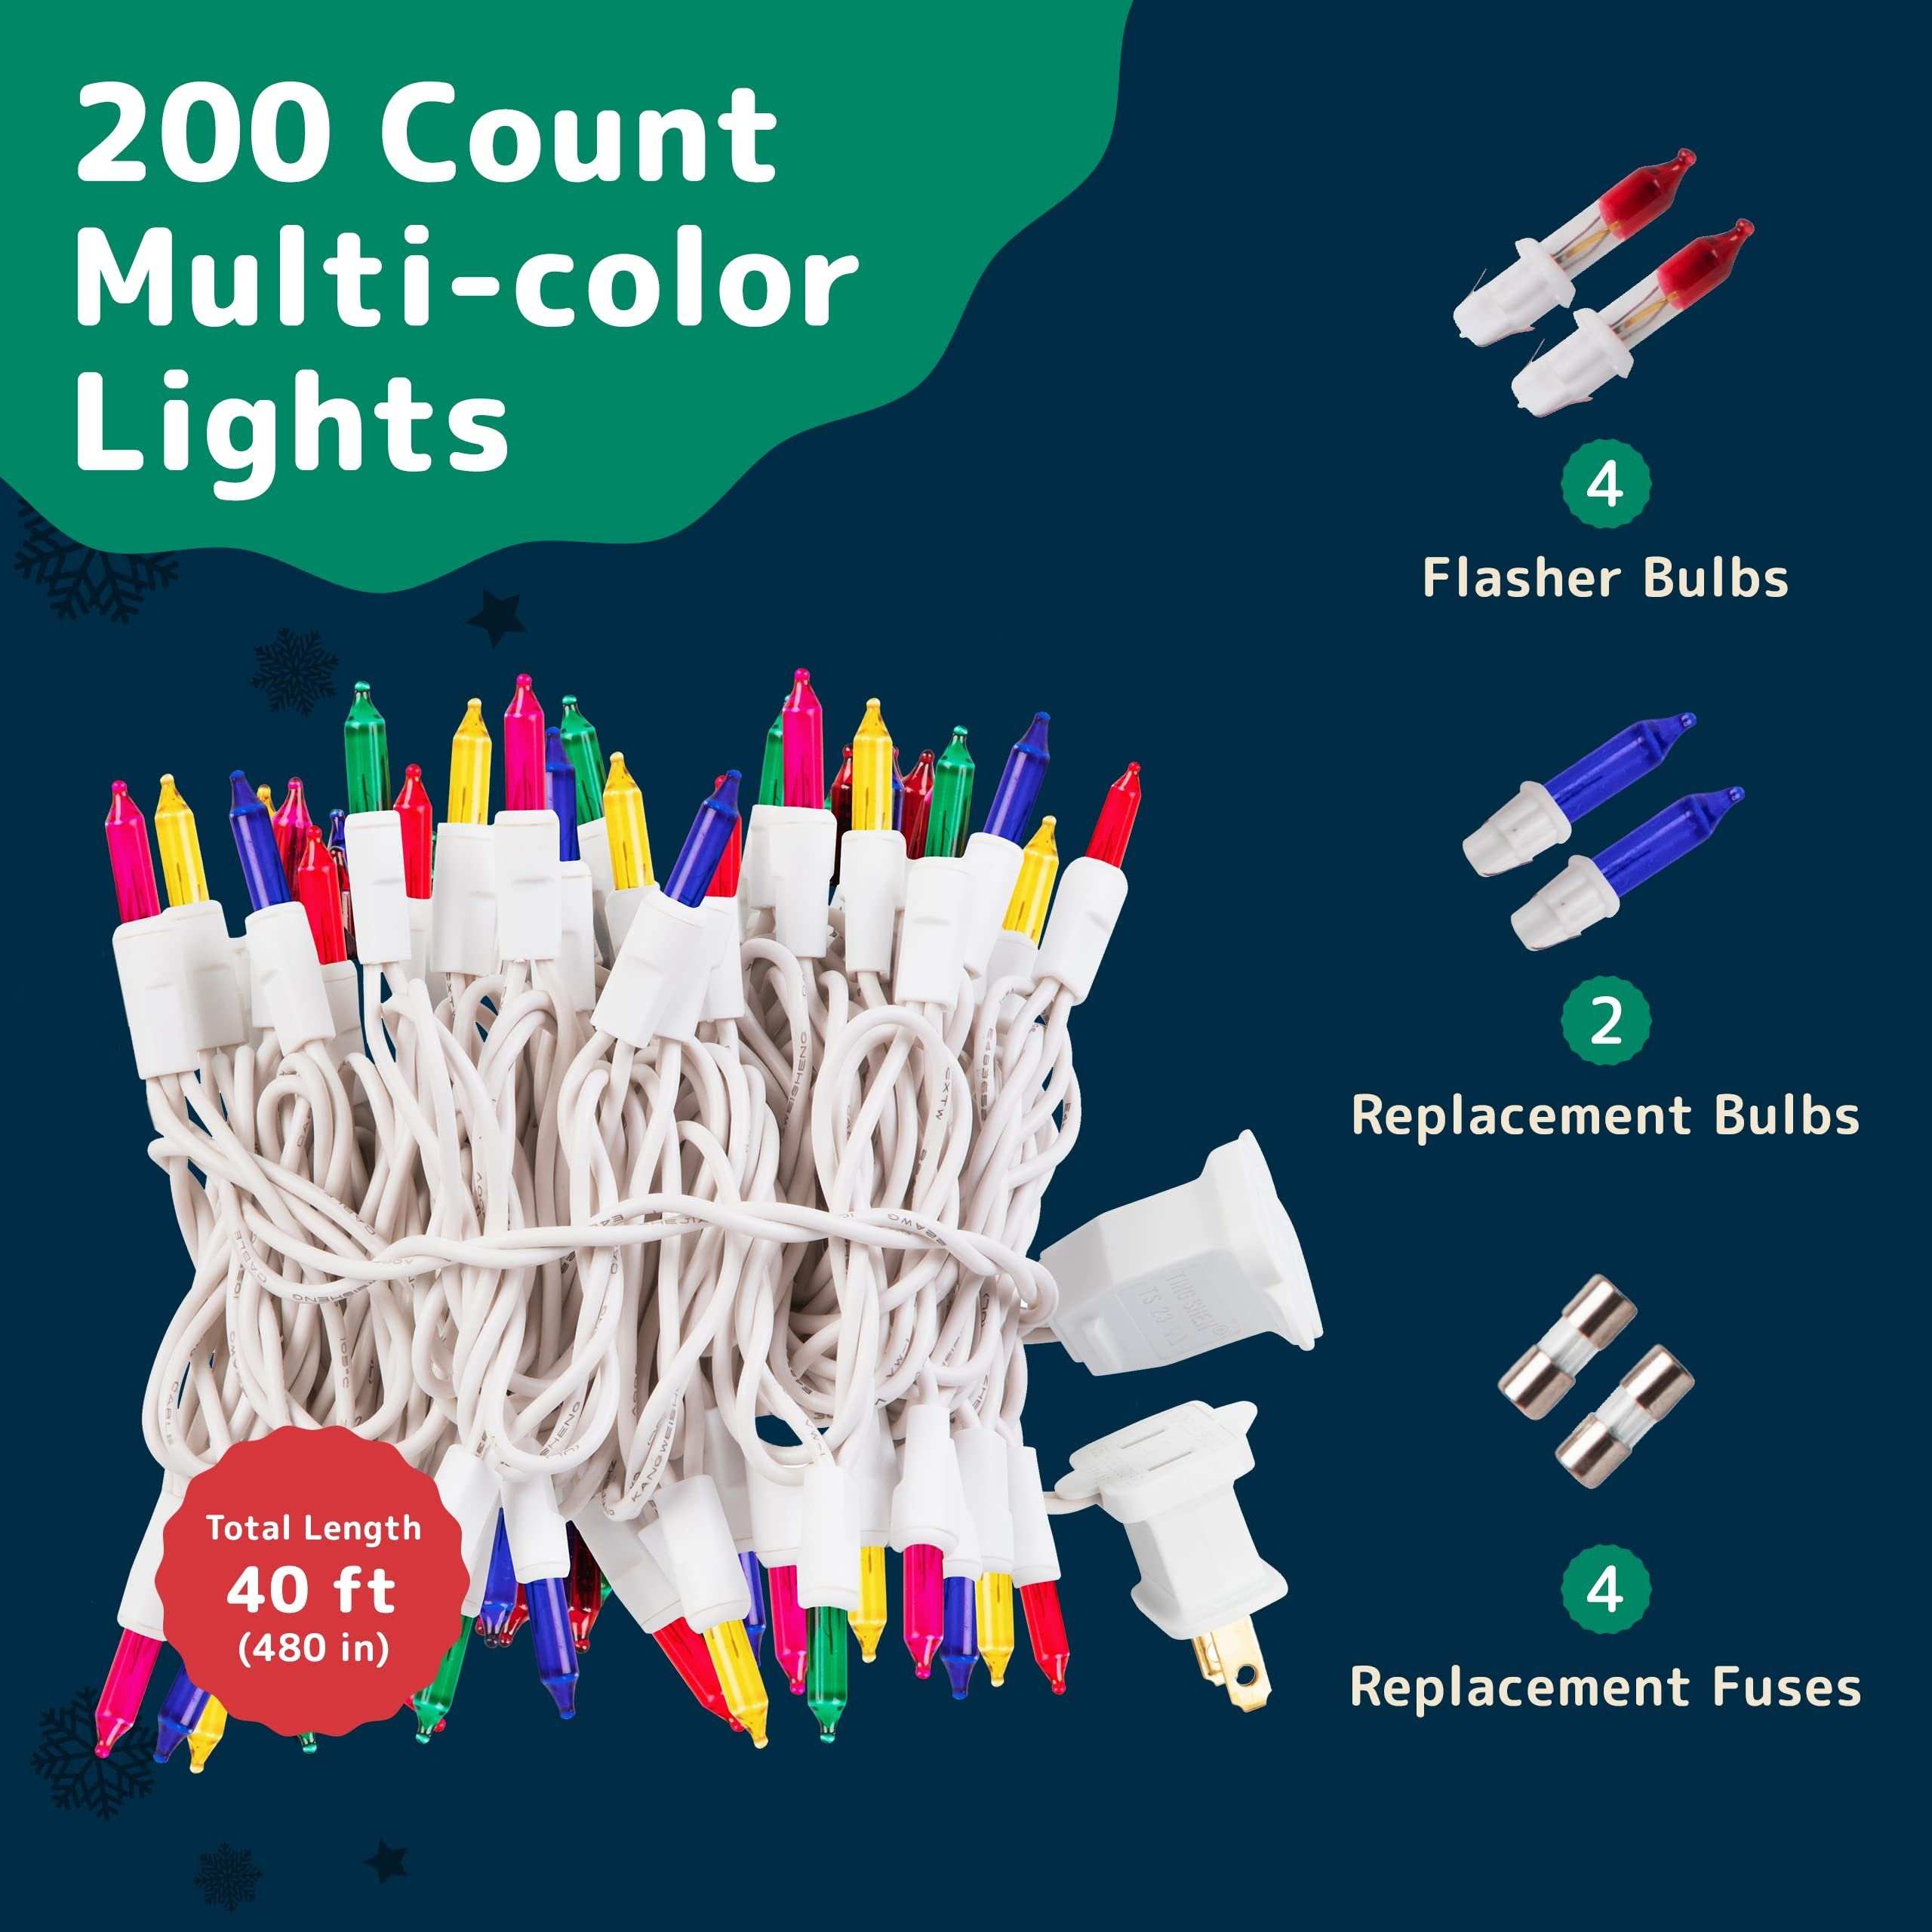 PREXTEX Bright & Colorful Christmas Lights (40 Feet, 200 Lights) - Fall Decor & Christmas Tree Lights with White Wire - Indoor/Outdoor String Lights - Multi-Color Twinkle Lights